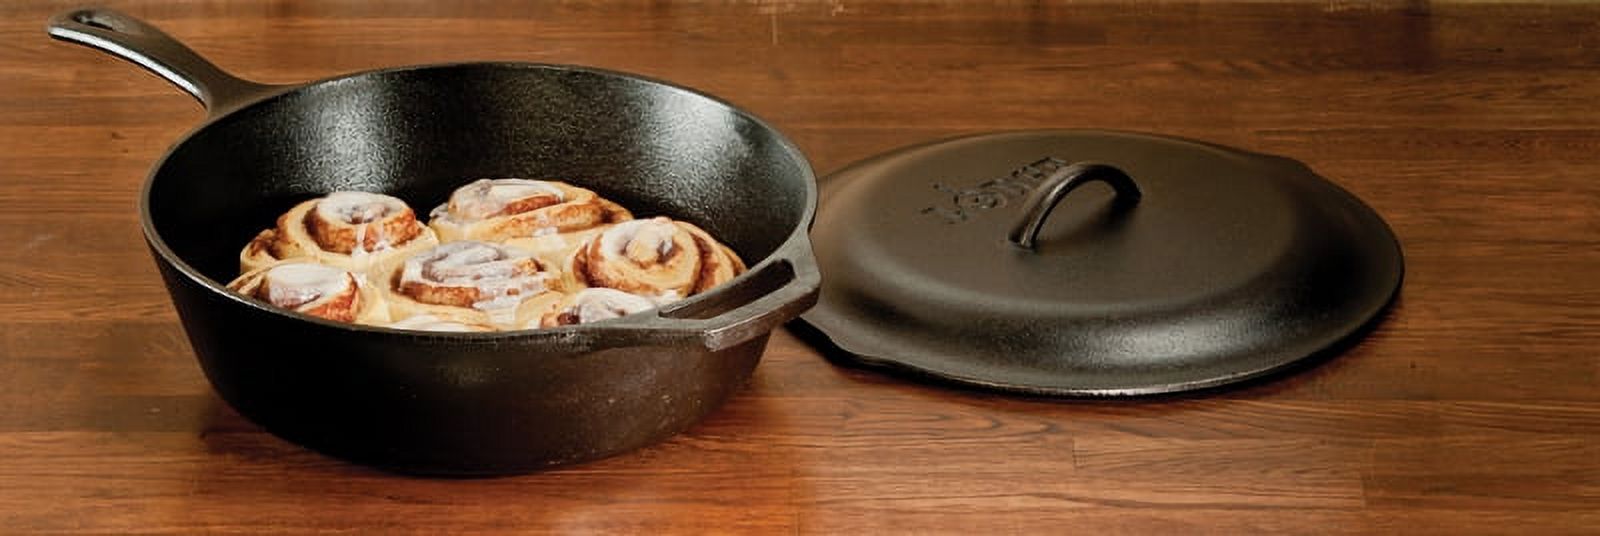 Lodge Cast Iron Pre-Seasoned Deep Skillet with Iron Cover and Assist Handle, 5 Quart, Black - image 3 of 8